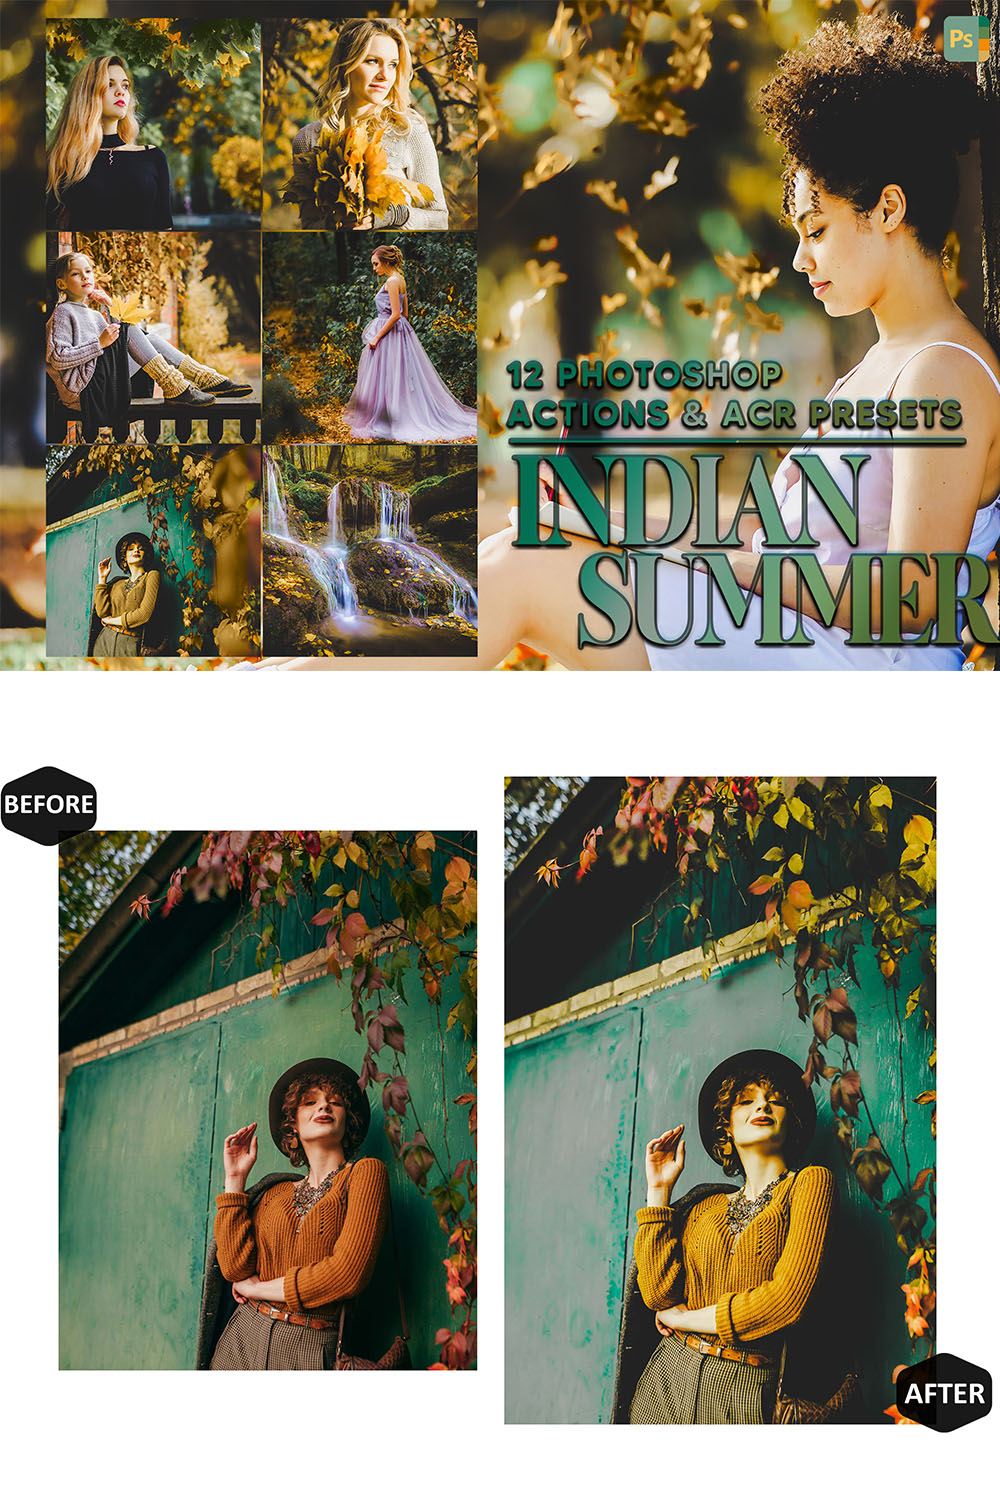 12 Photoshop Actions, Indian Summer Ps Action, Autumn ACR Preset, Fall Yellow Ps Filter, Portrait And Lifestyle Theme For Instagram, Blogger pinterest preview image.